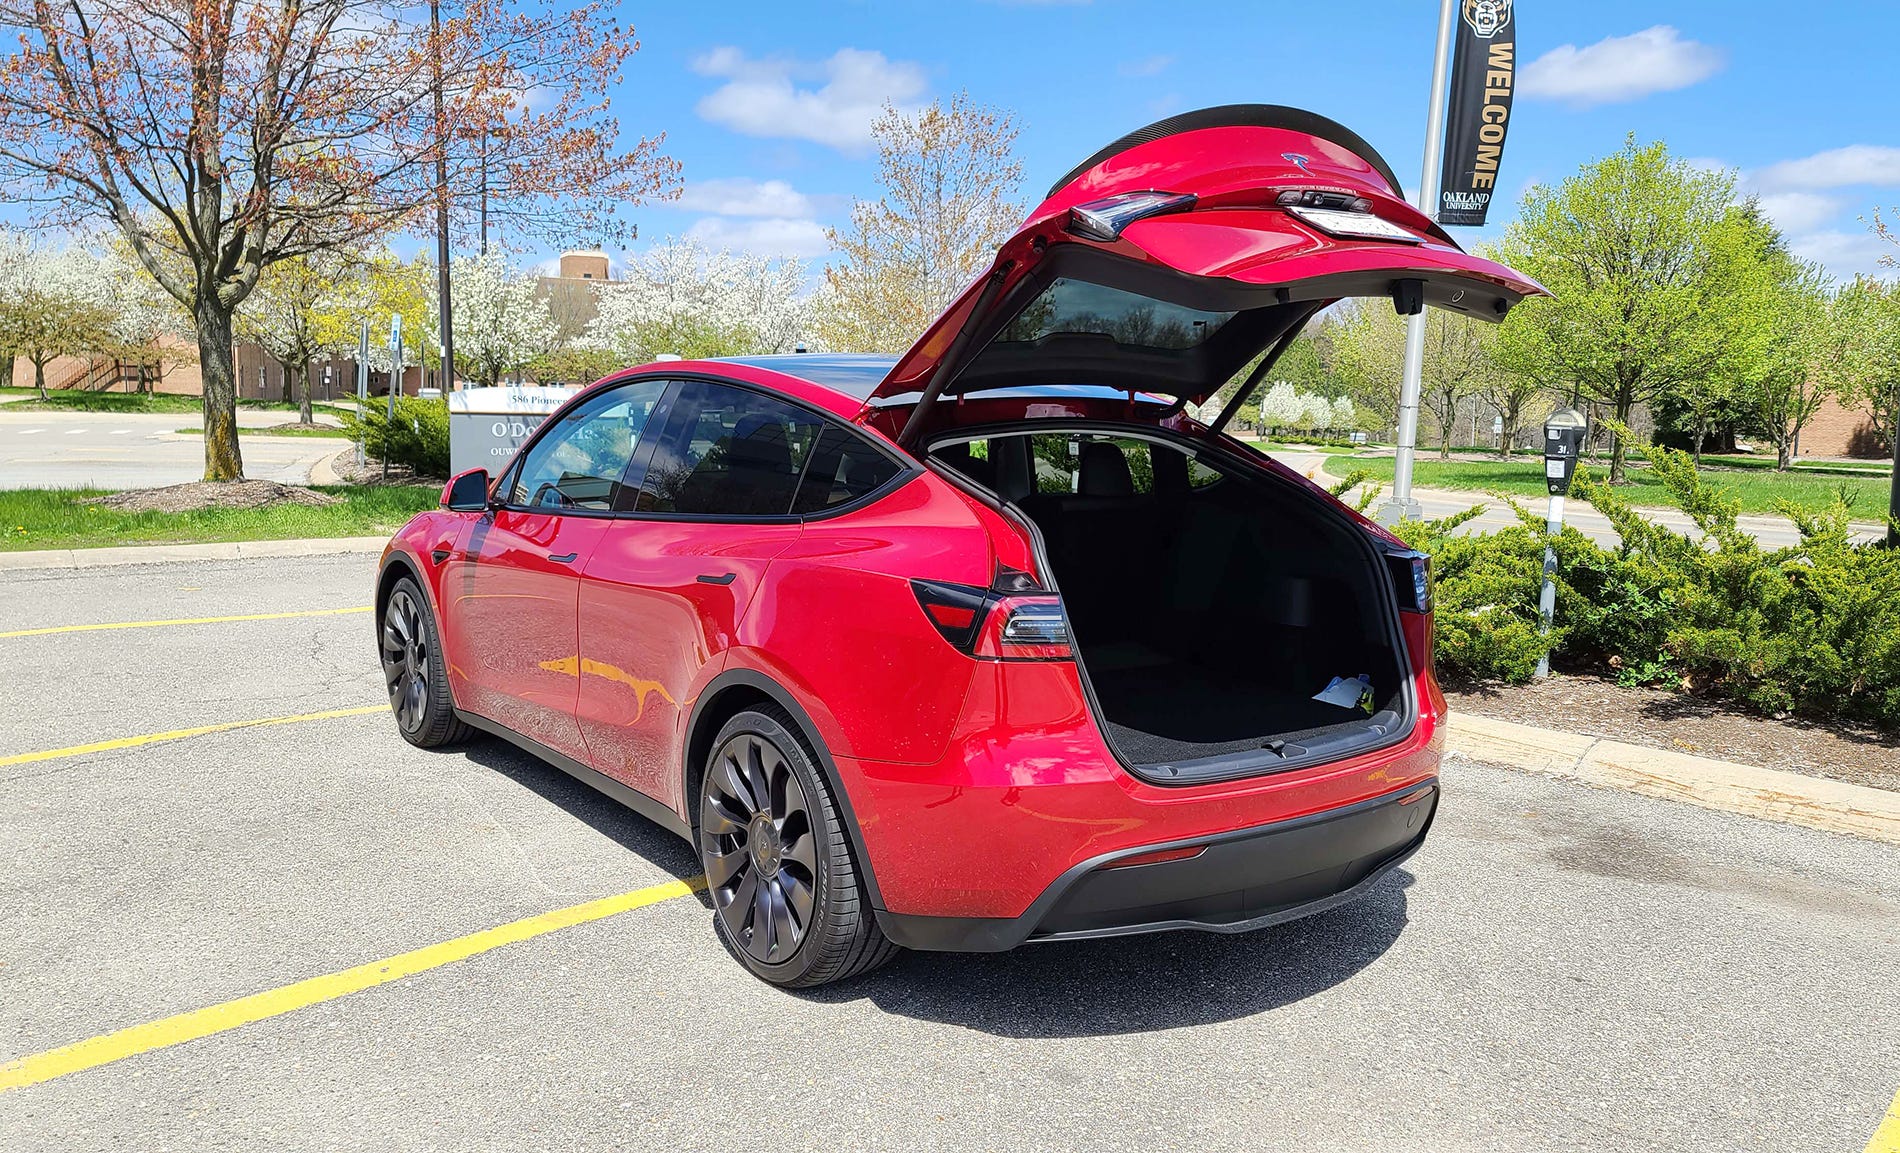 Got hatch? Americans love five-door SUVs for their cargo storage, and the Model Y should be Tesla's best-seller when production resumes.